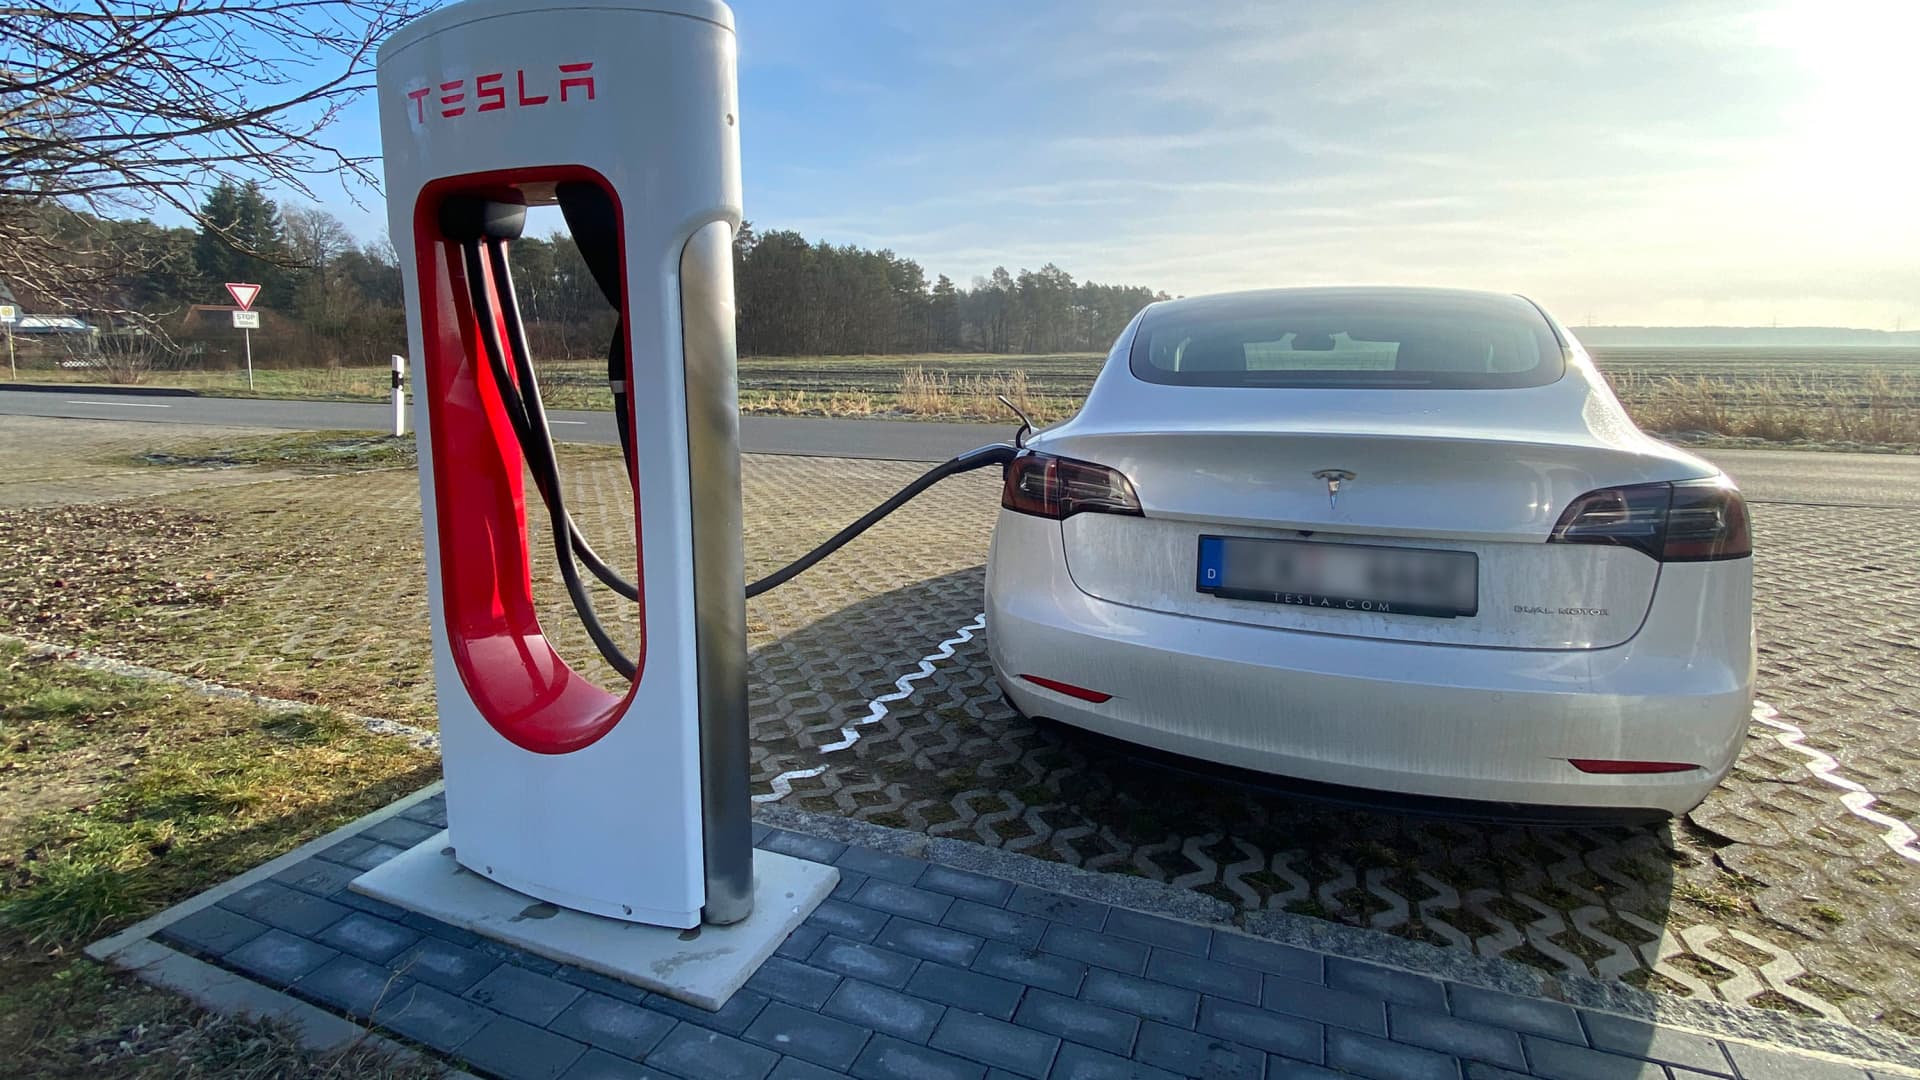 A Tesla Model 3 plugged in and charging at a Supercharger rapid battery charging station for electric vehicles in Bersteland, Germany, on March 02, 2021.